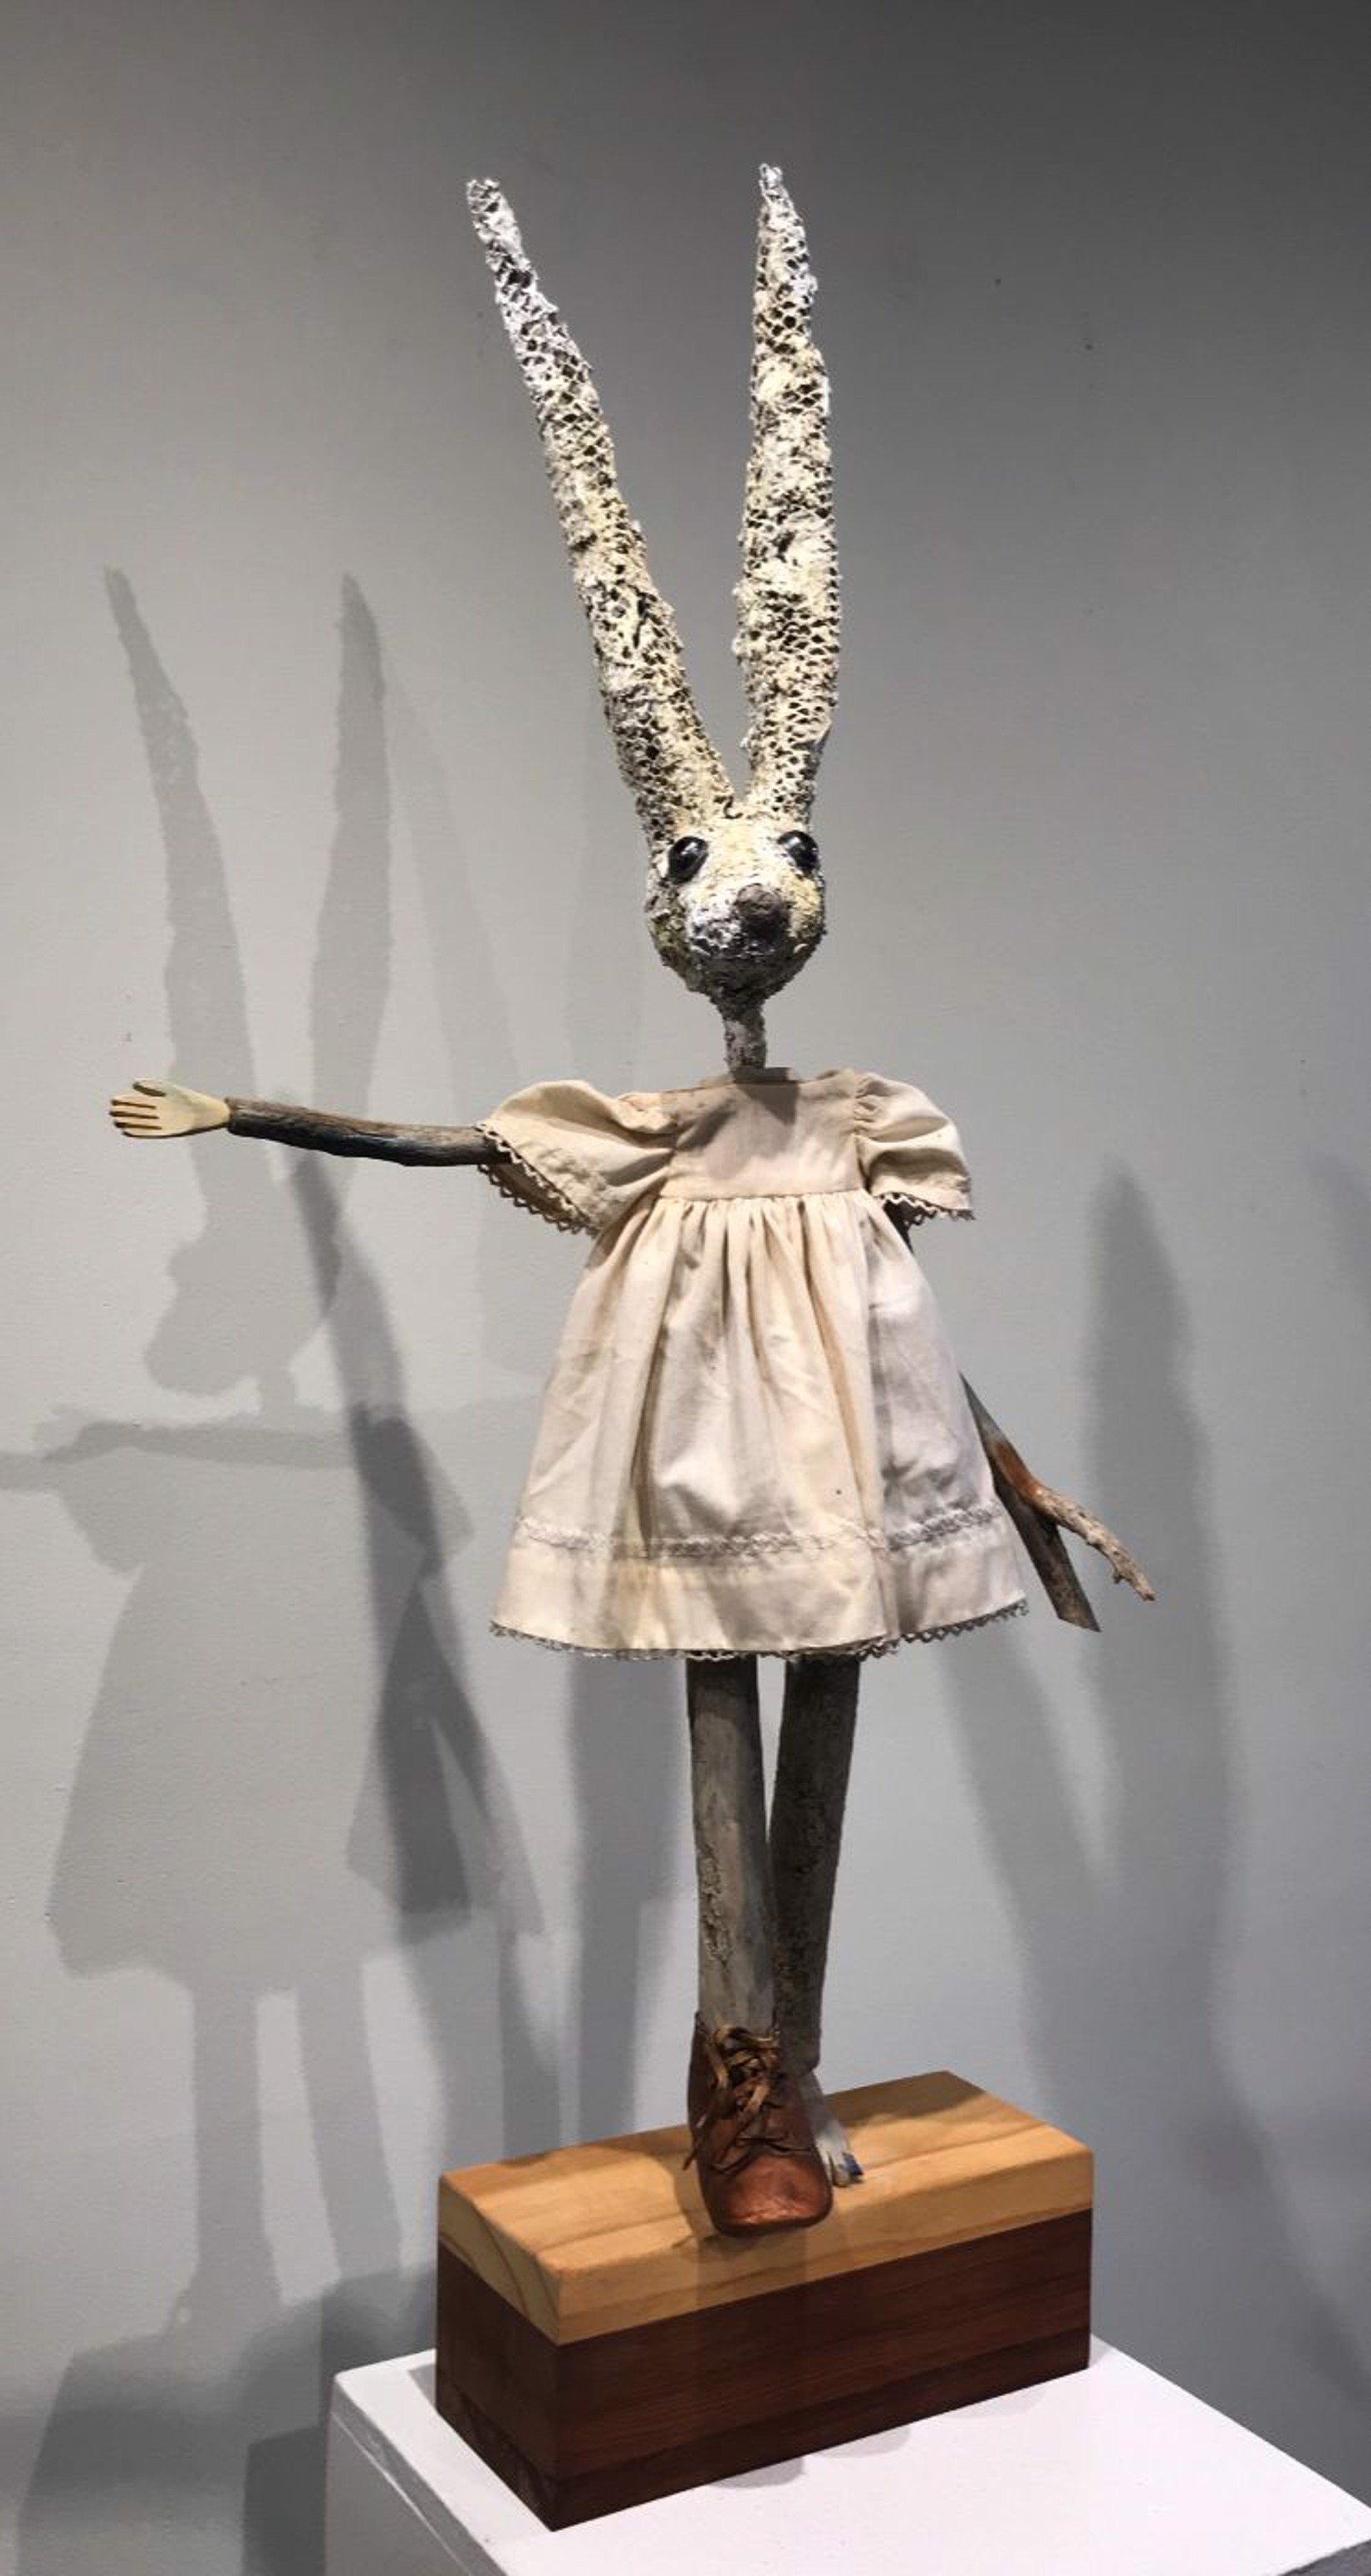 Young Rabbit with a Bronze Shoe by Gary Olson